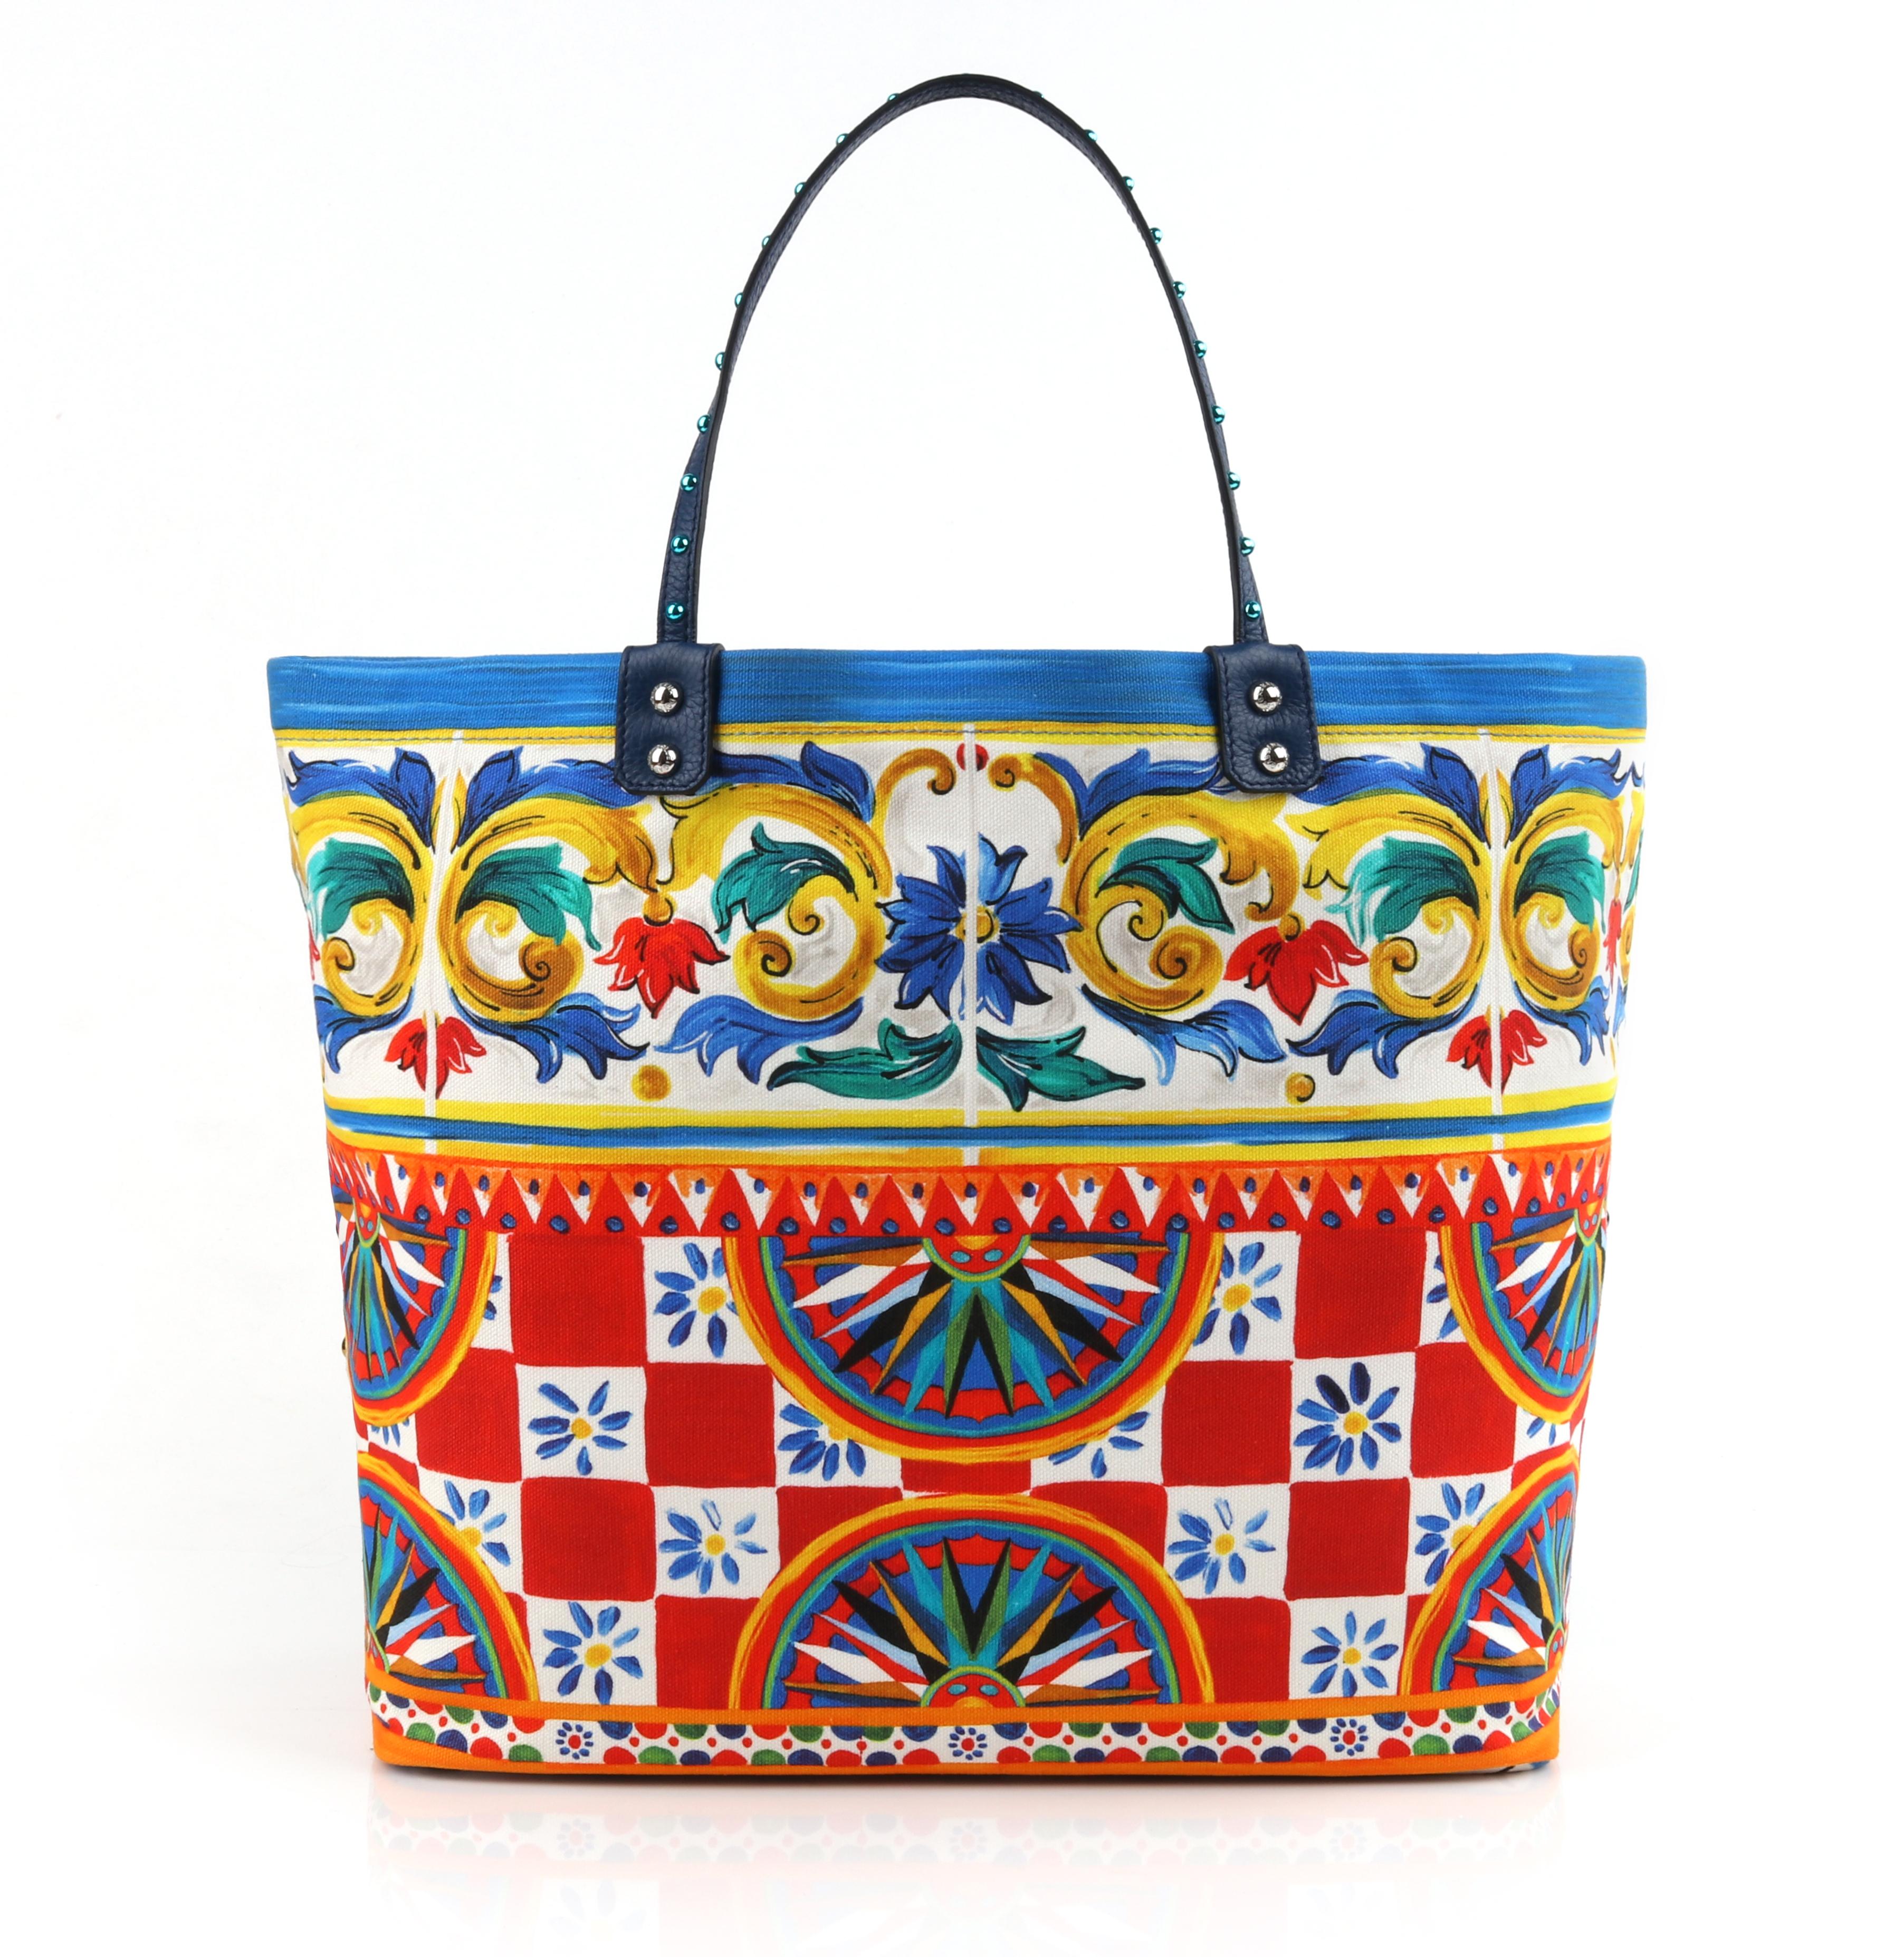 DOLCE & GABBANA S/S 2013 “Beatrice” Multi-color Carretto Maiolica Embellished Canvas Shopper Tote Bag NWT
 
Estimated Retail: $2,175
 
Brand / Manufacturer: Dolce & Gabbana
Collection: Spring / Summer 2013
Manufacture Style Name: Beatrice 
Style: